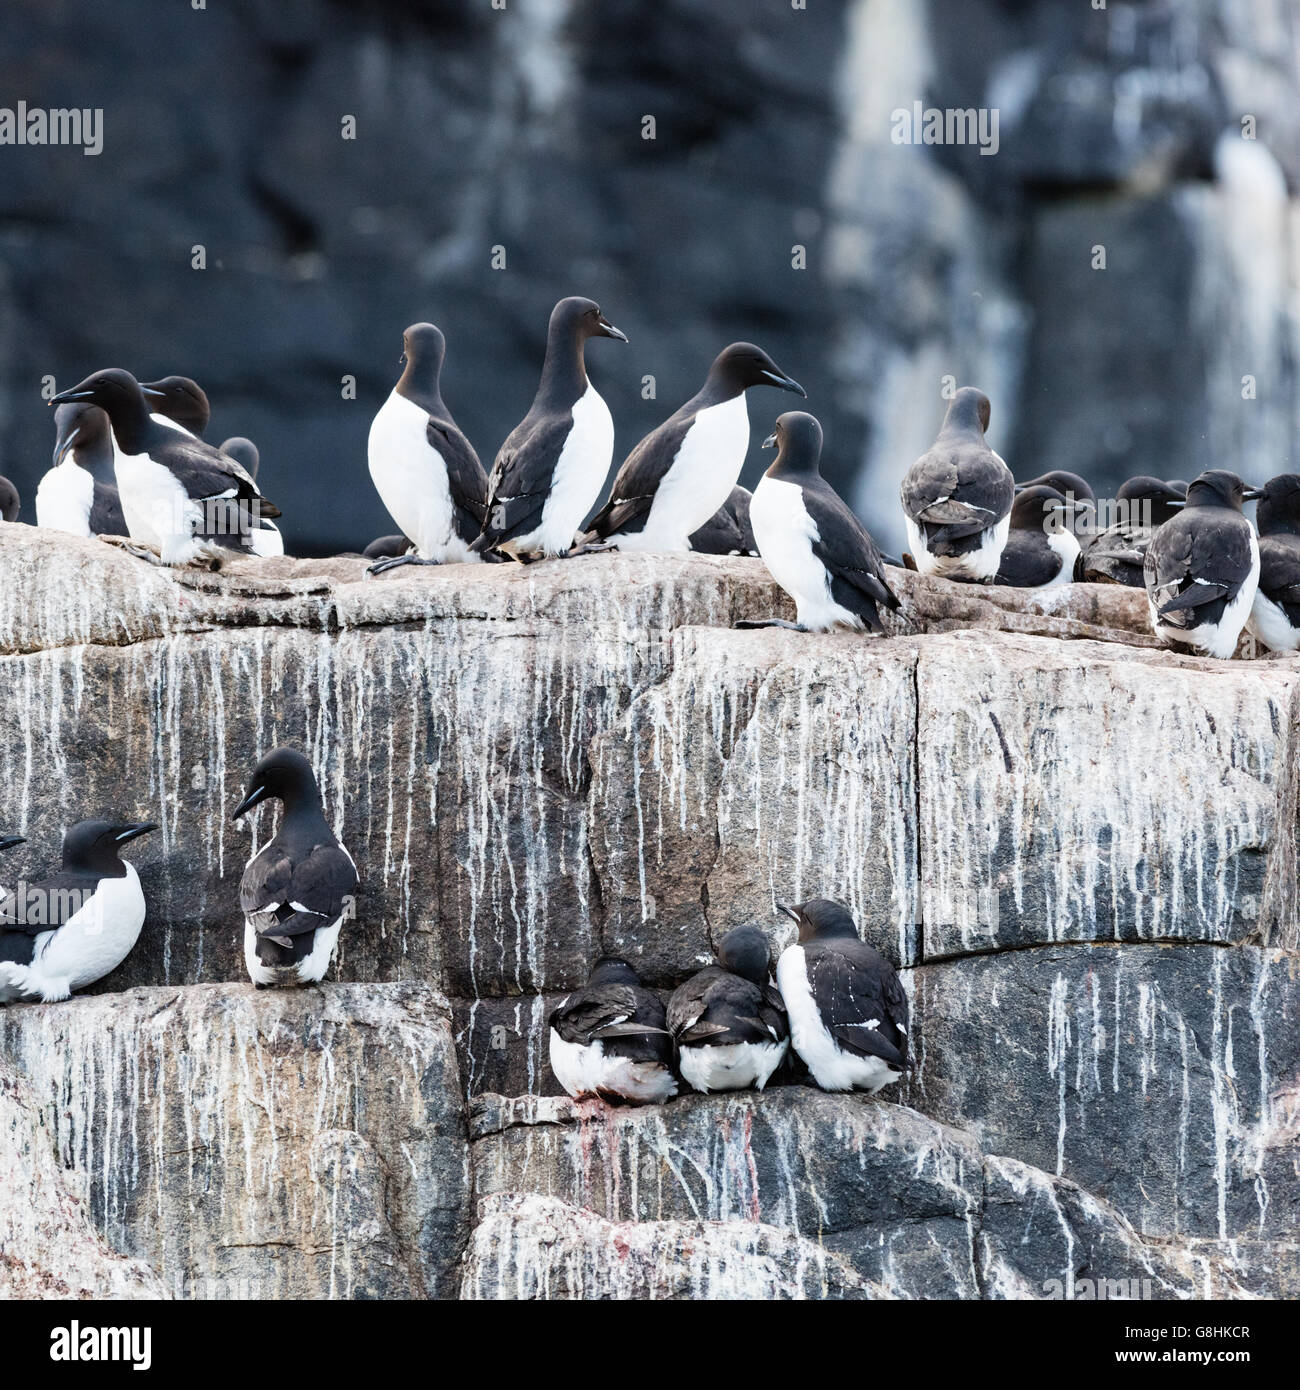 A few of the thousands of guillemots nesting on the Alkefjellet bird cliff near Cape Fanshawe in Spitsbergen, Norway Stock Photo